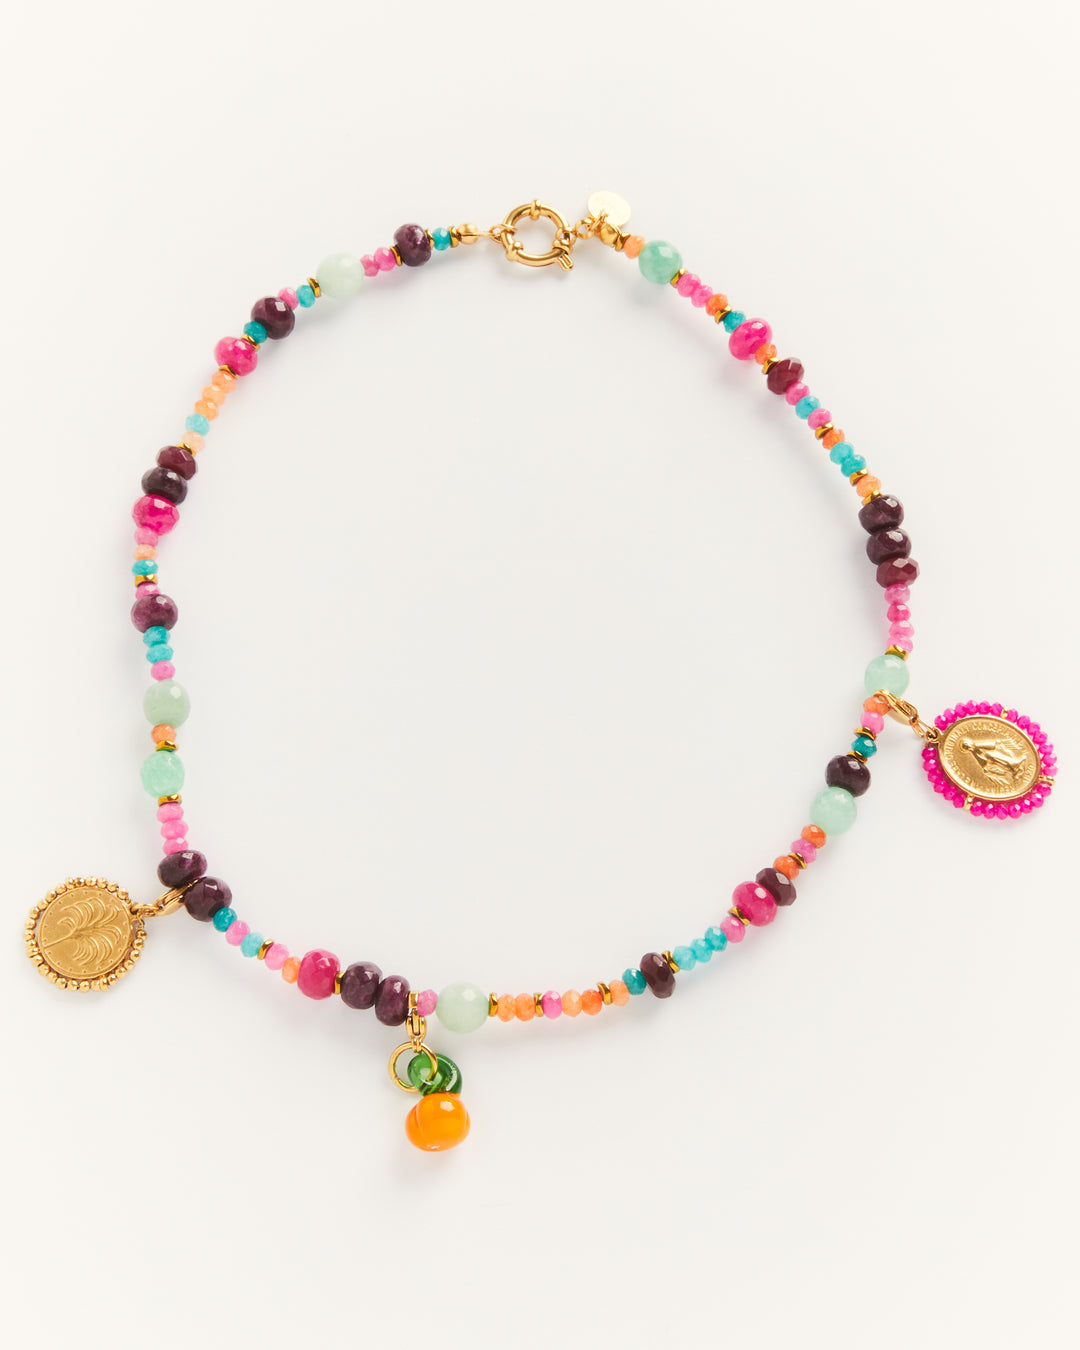 Bring on Summer necklace and charms - Palas